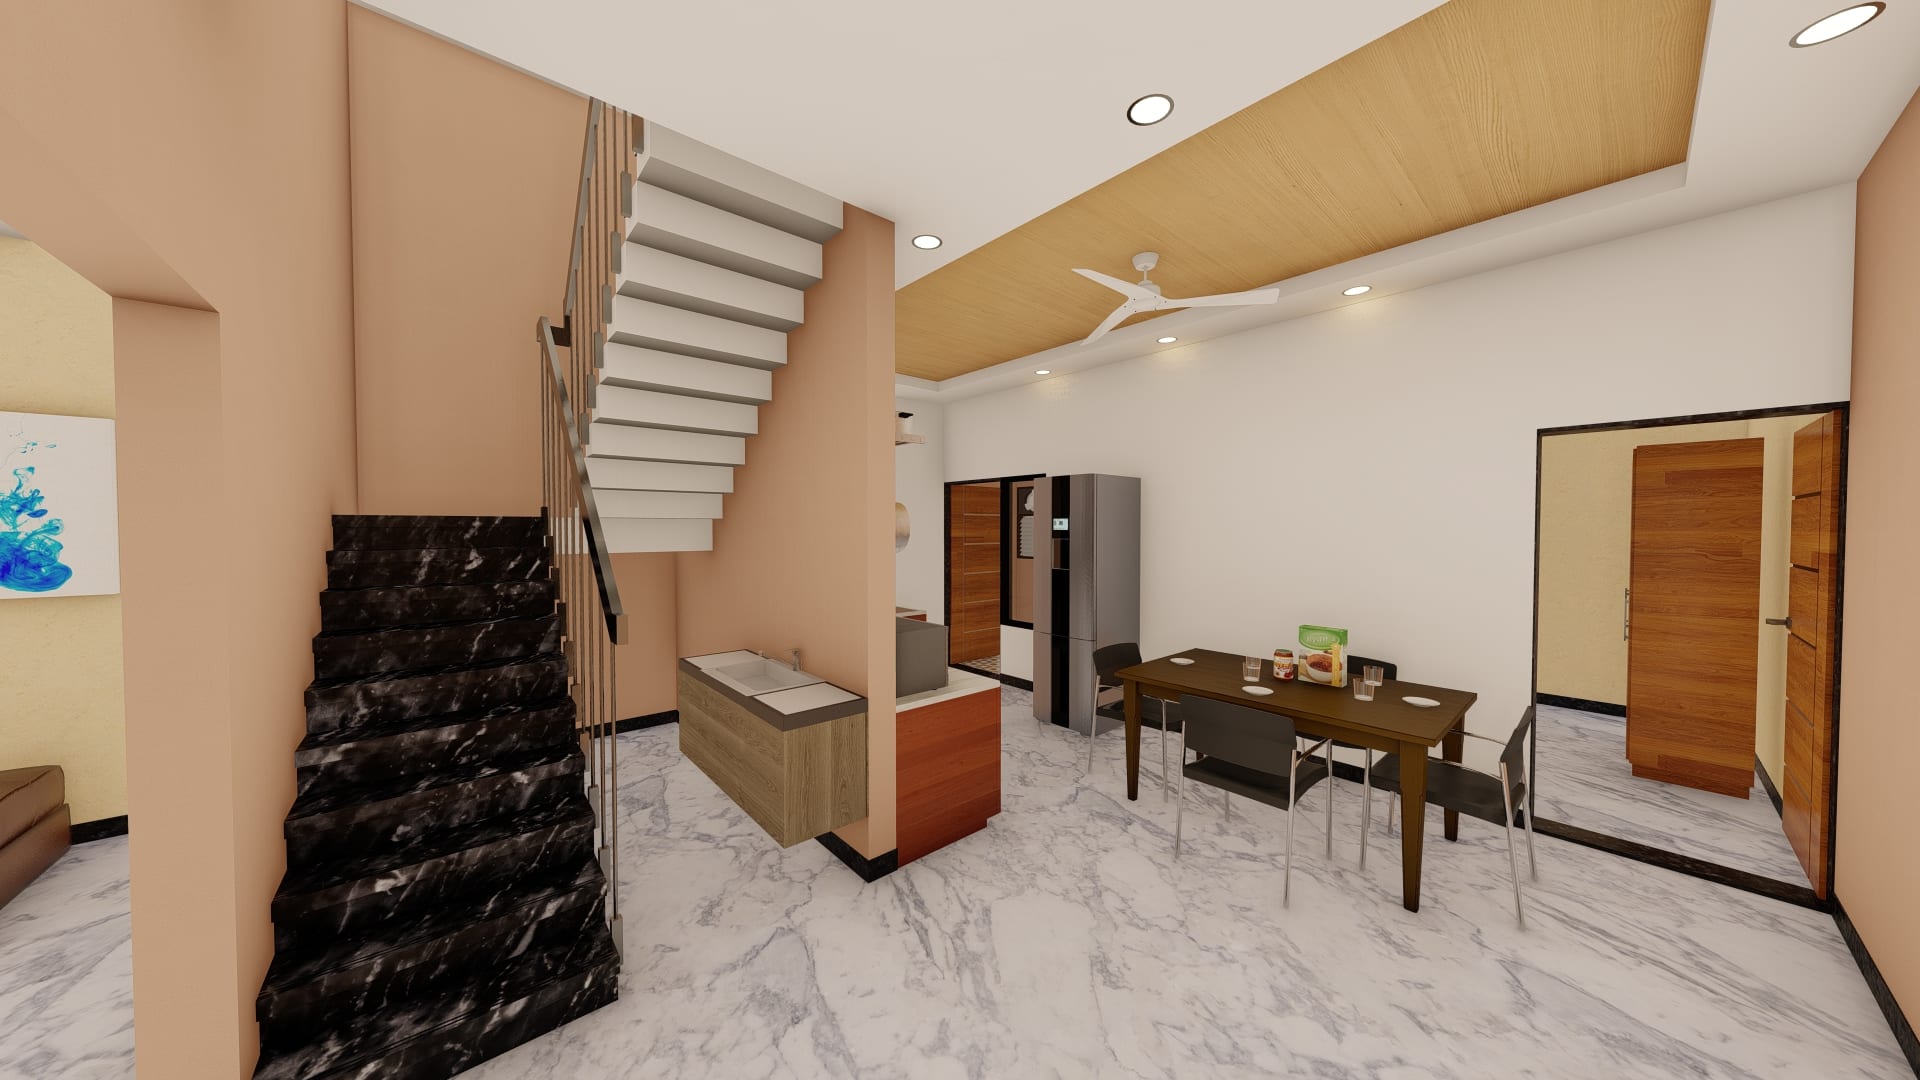 living room side area of new duplex layout design north facing 1000 sq ft urban terrace